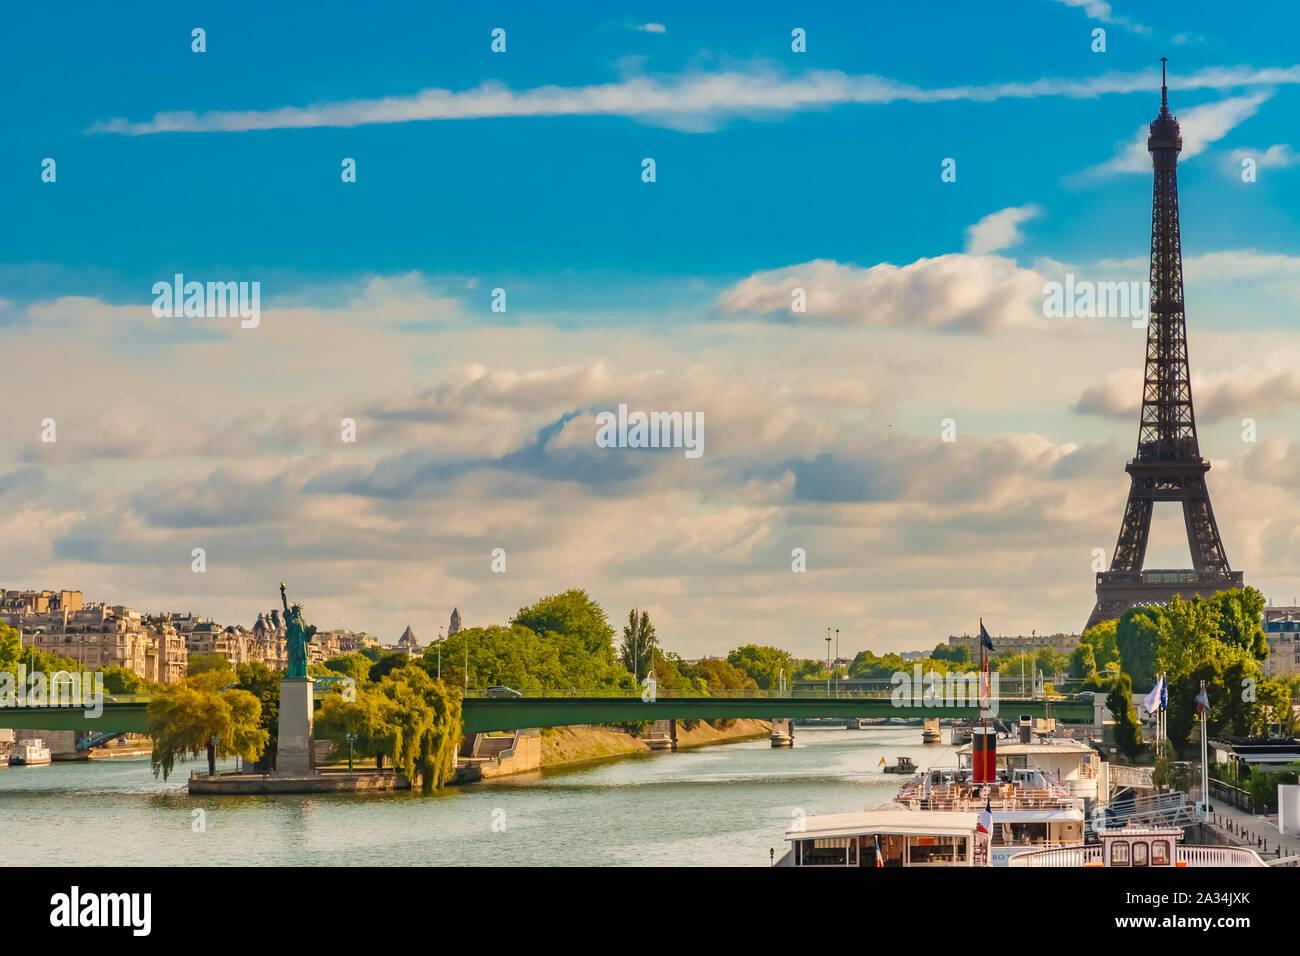 Lovely panoramic view of the Eiffel Tower together with the Statue of Liberty replica on the island Île aux Cygnes and the Pont de Grenelle bridge on Stock Photo